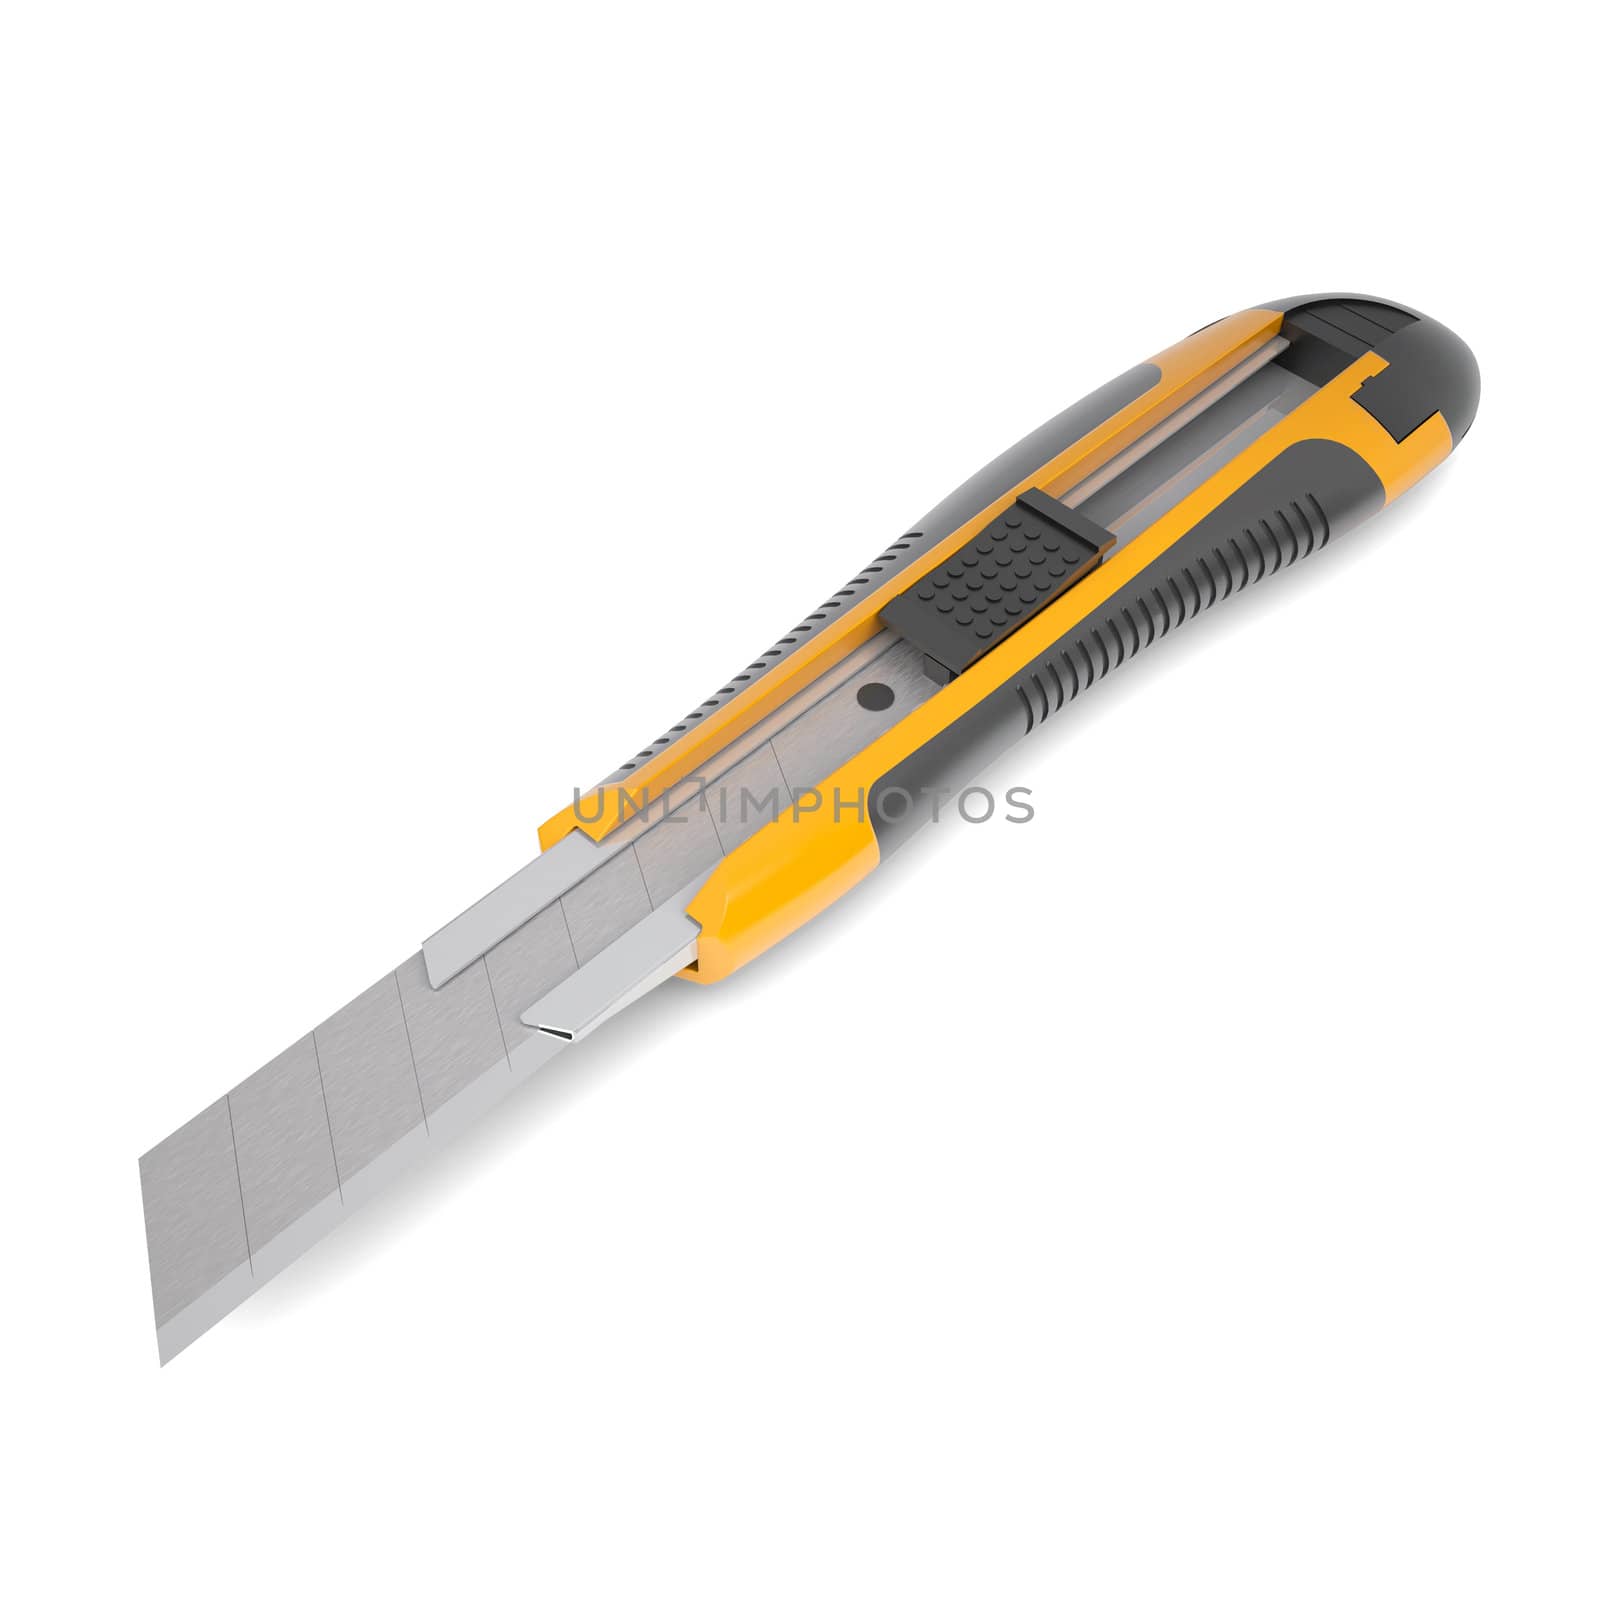 Stationery knife. Isolated render on a white background